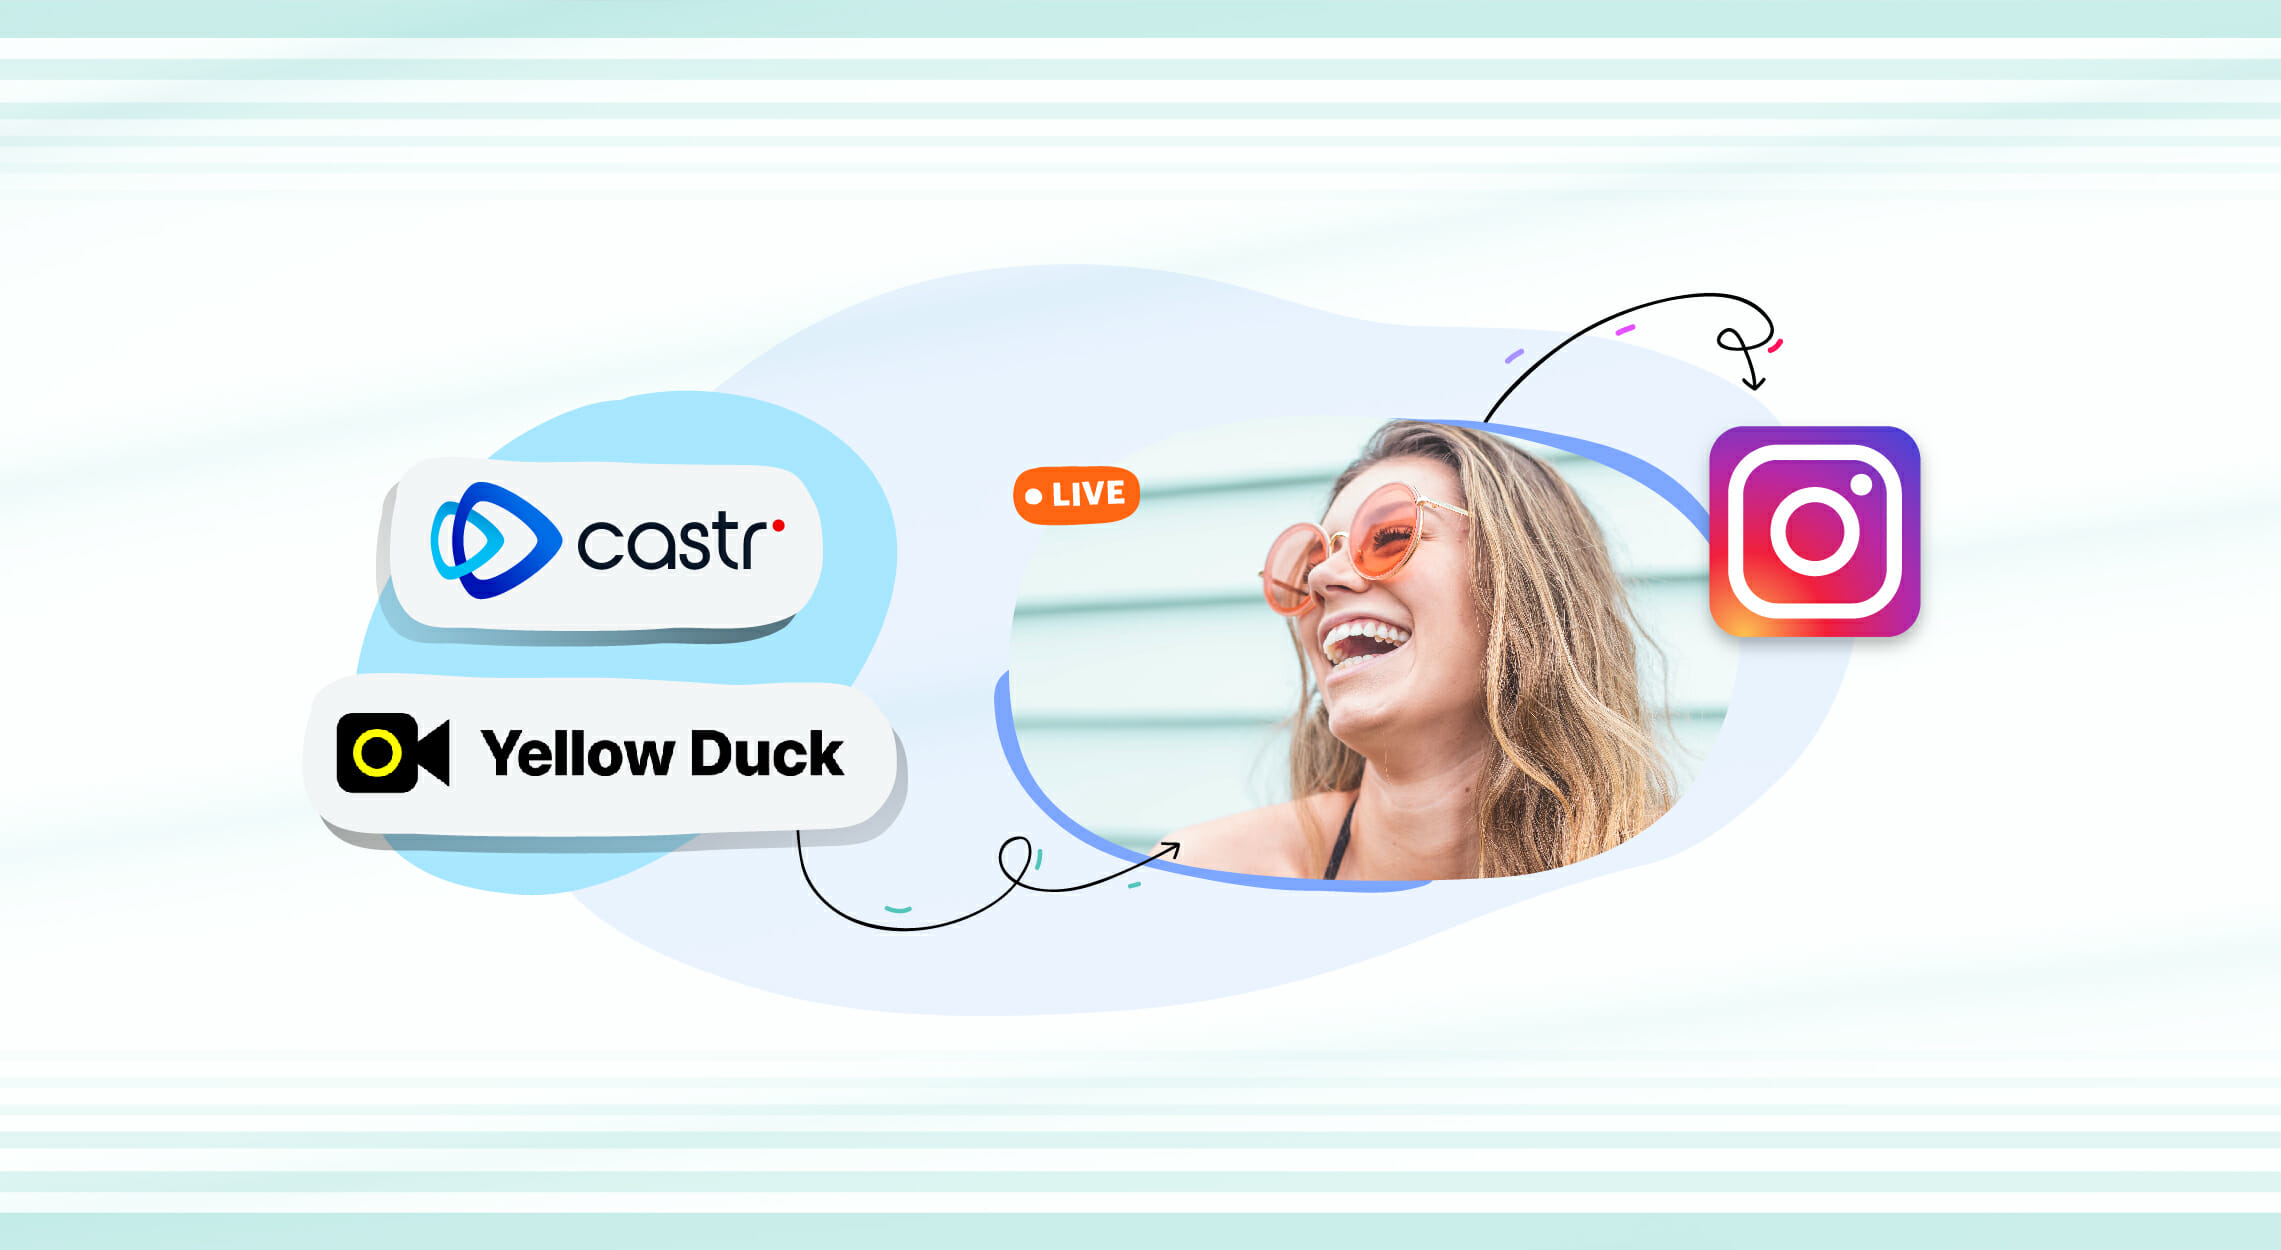 stream-to-instagram-from-castr-with-yellow-duck-castr-s-blog